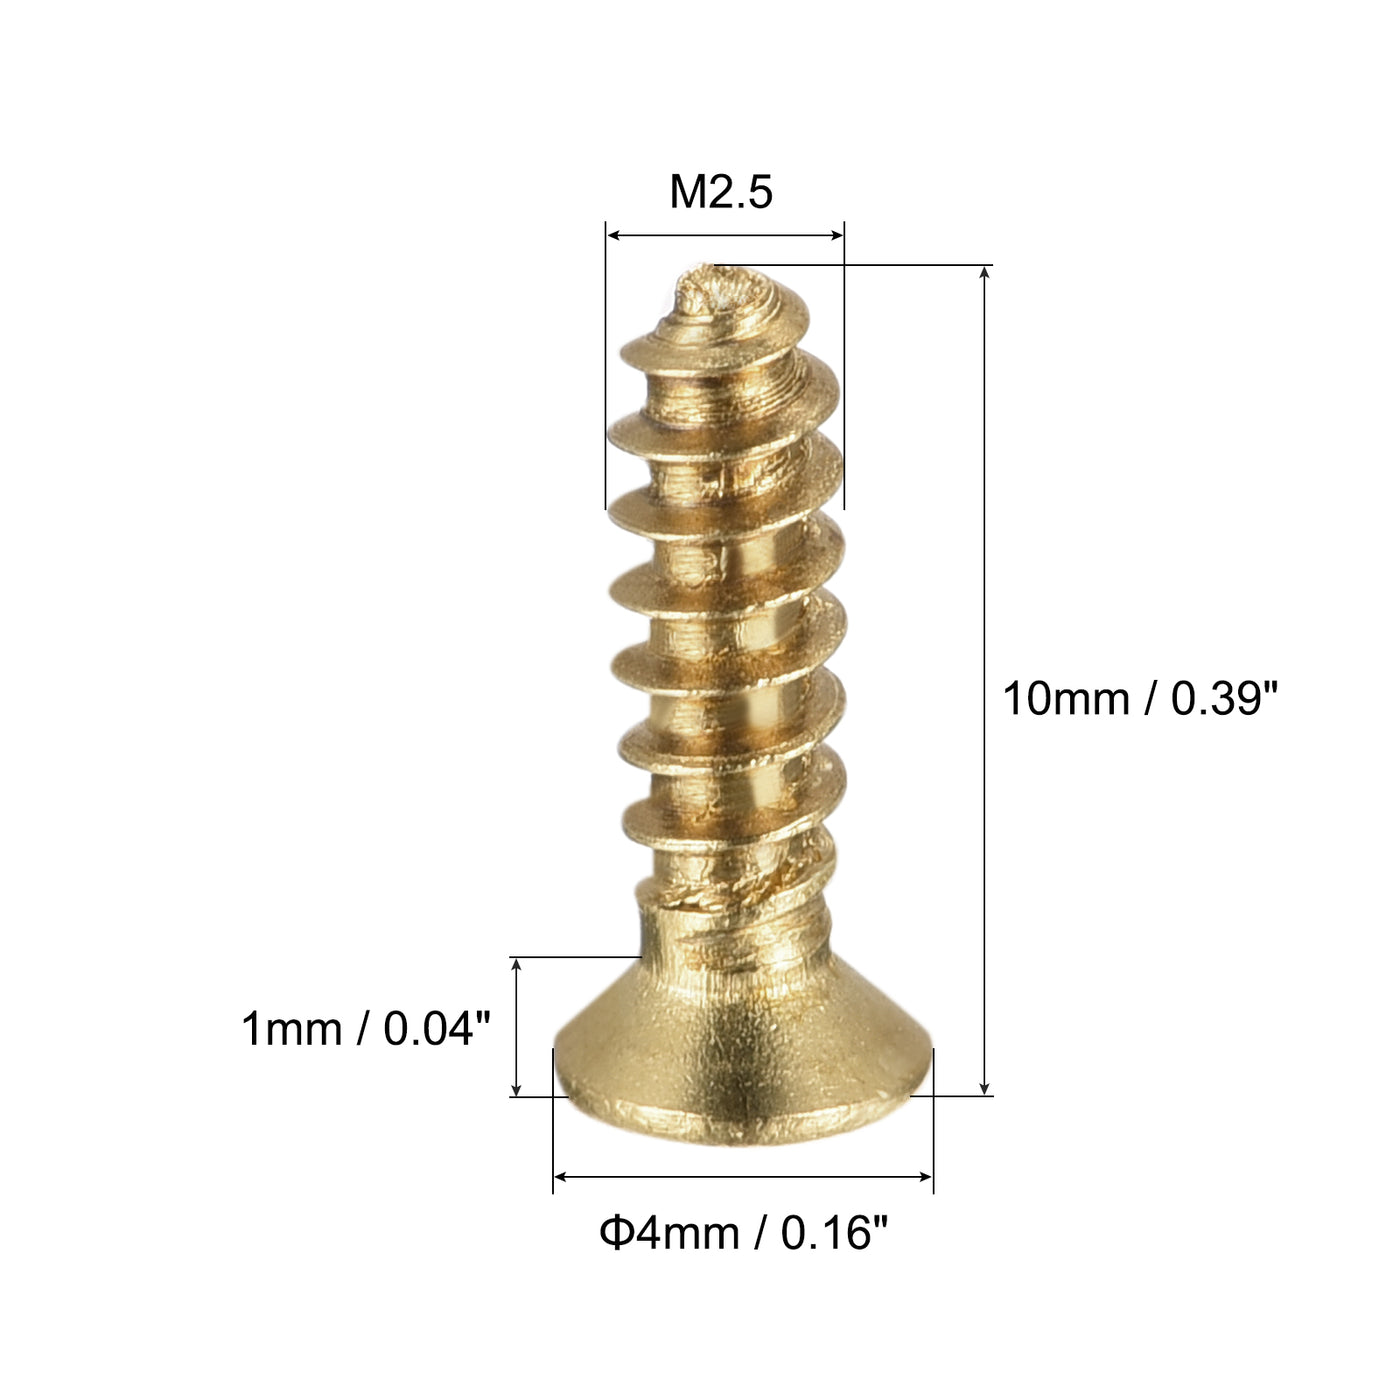 uxcell Uxcell Brass Wood Screws, M2.5x10mm Phillips Flat Head Self Tapping Connector for Door, Cabinet, Wooden Furniture 100Pcs